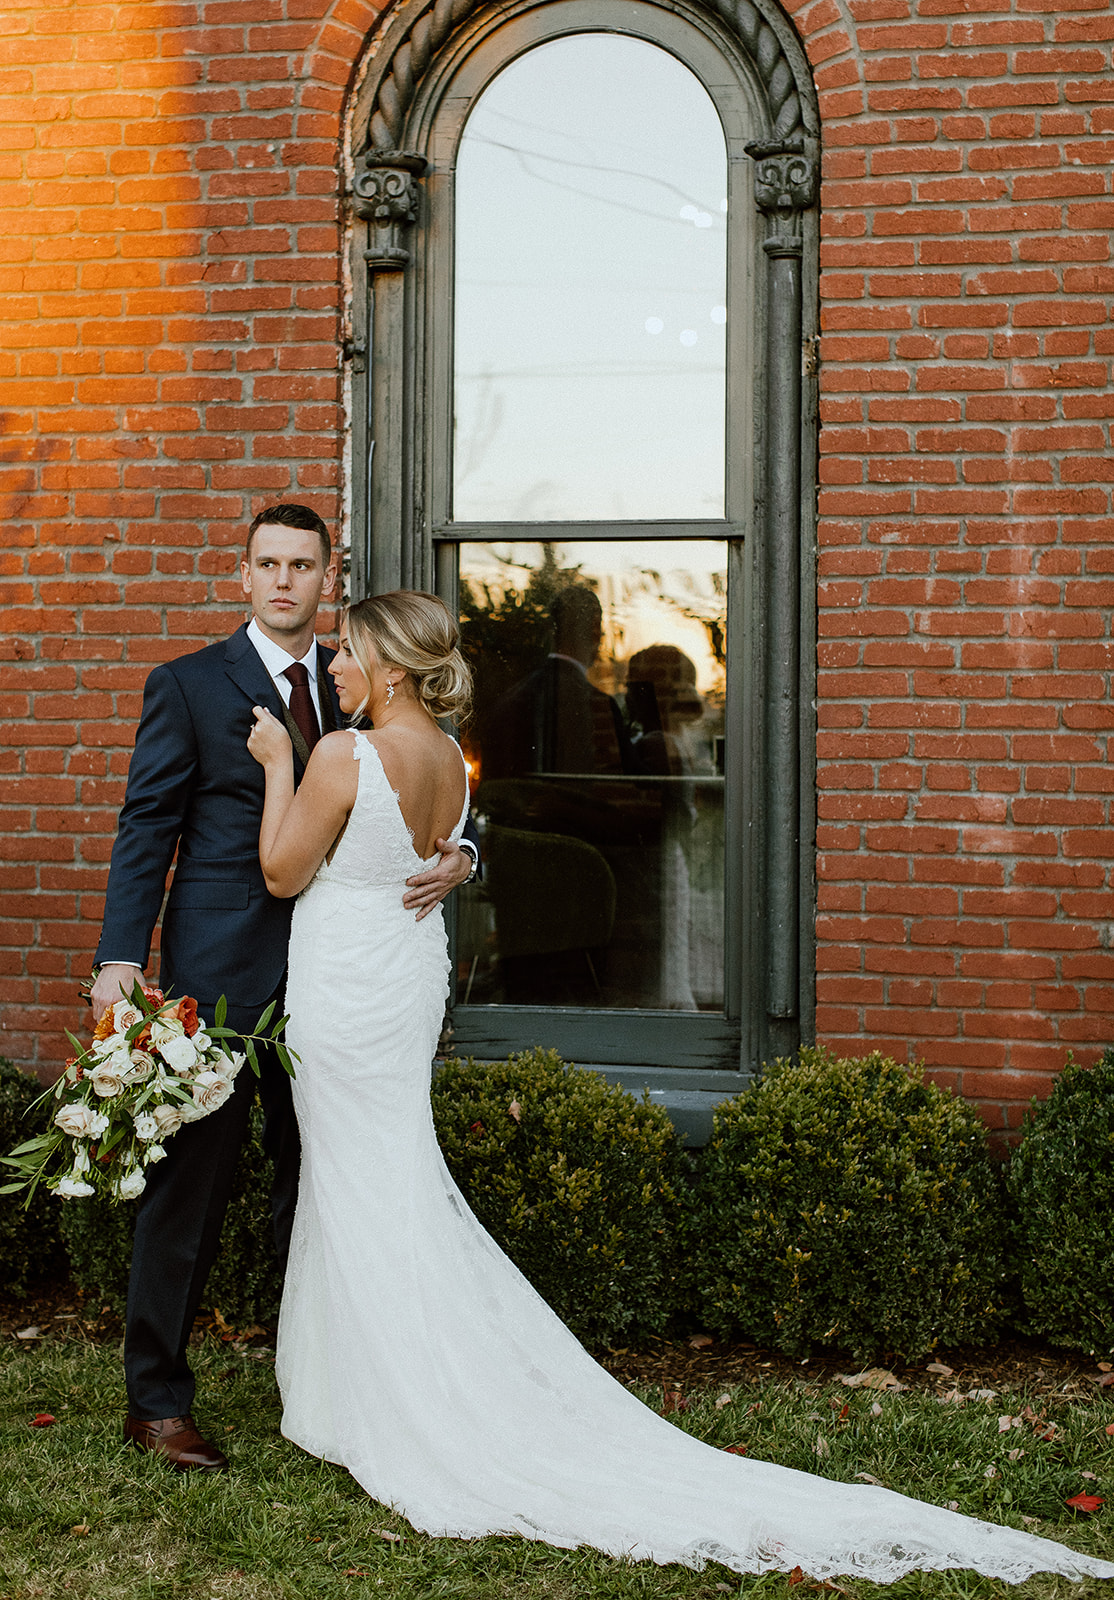 Alabaster Collective Nashville was the perfect backdrop for this Intimate Nashville Wedding. Photography by Emily Battles Photography